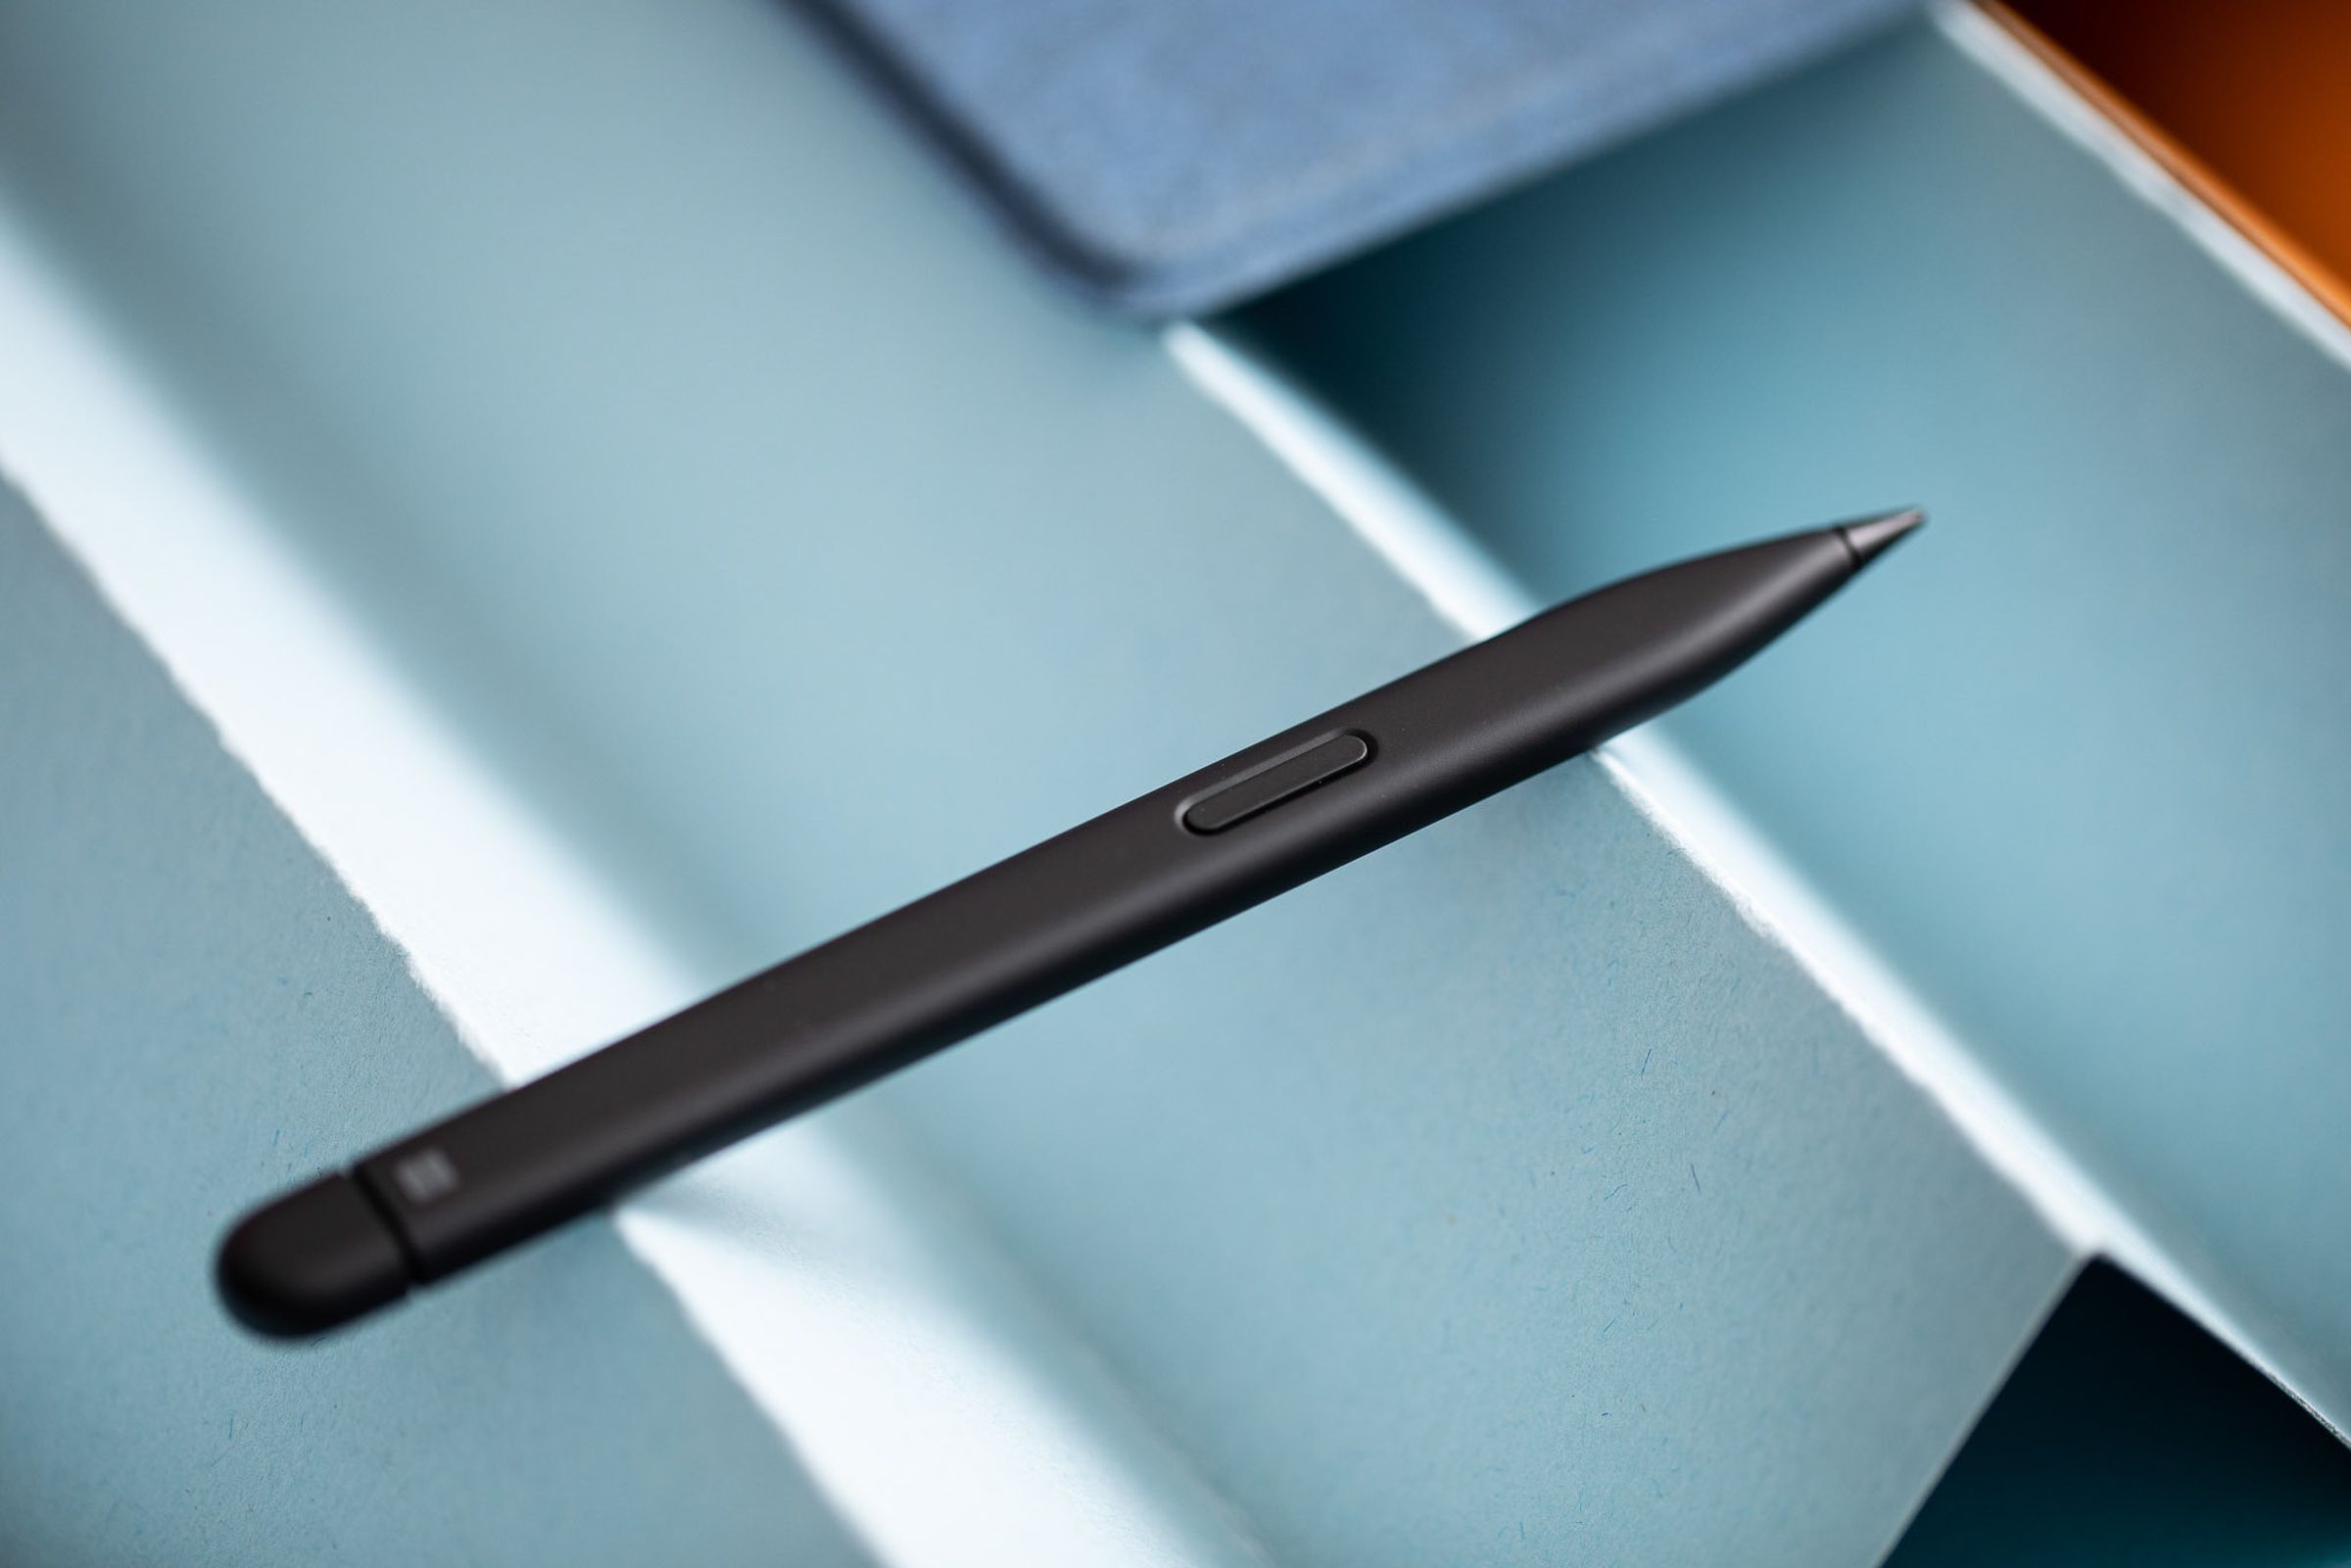 The Surface Pen seen from above.